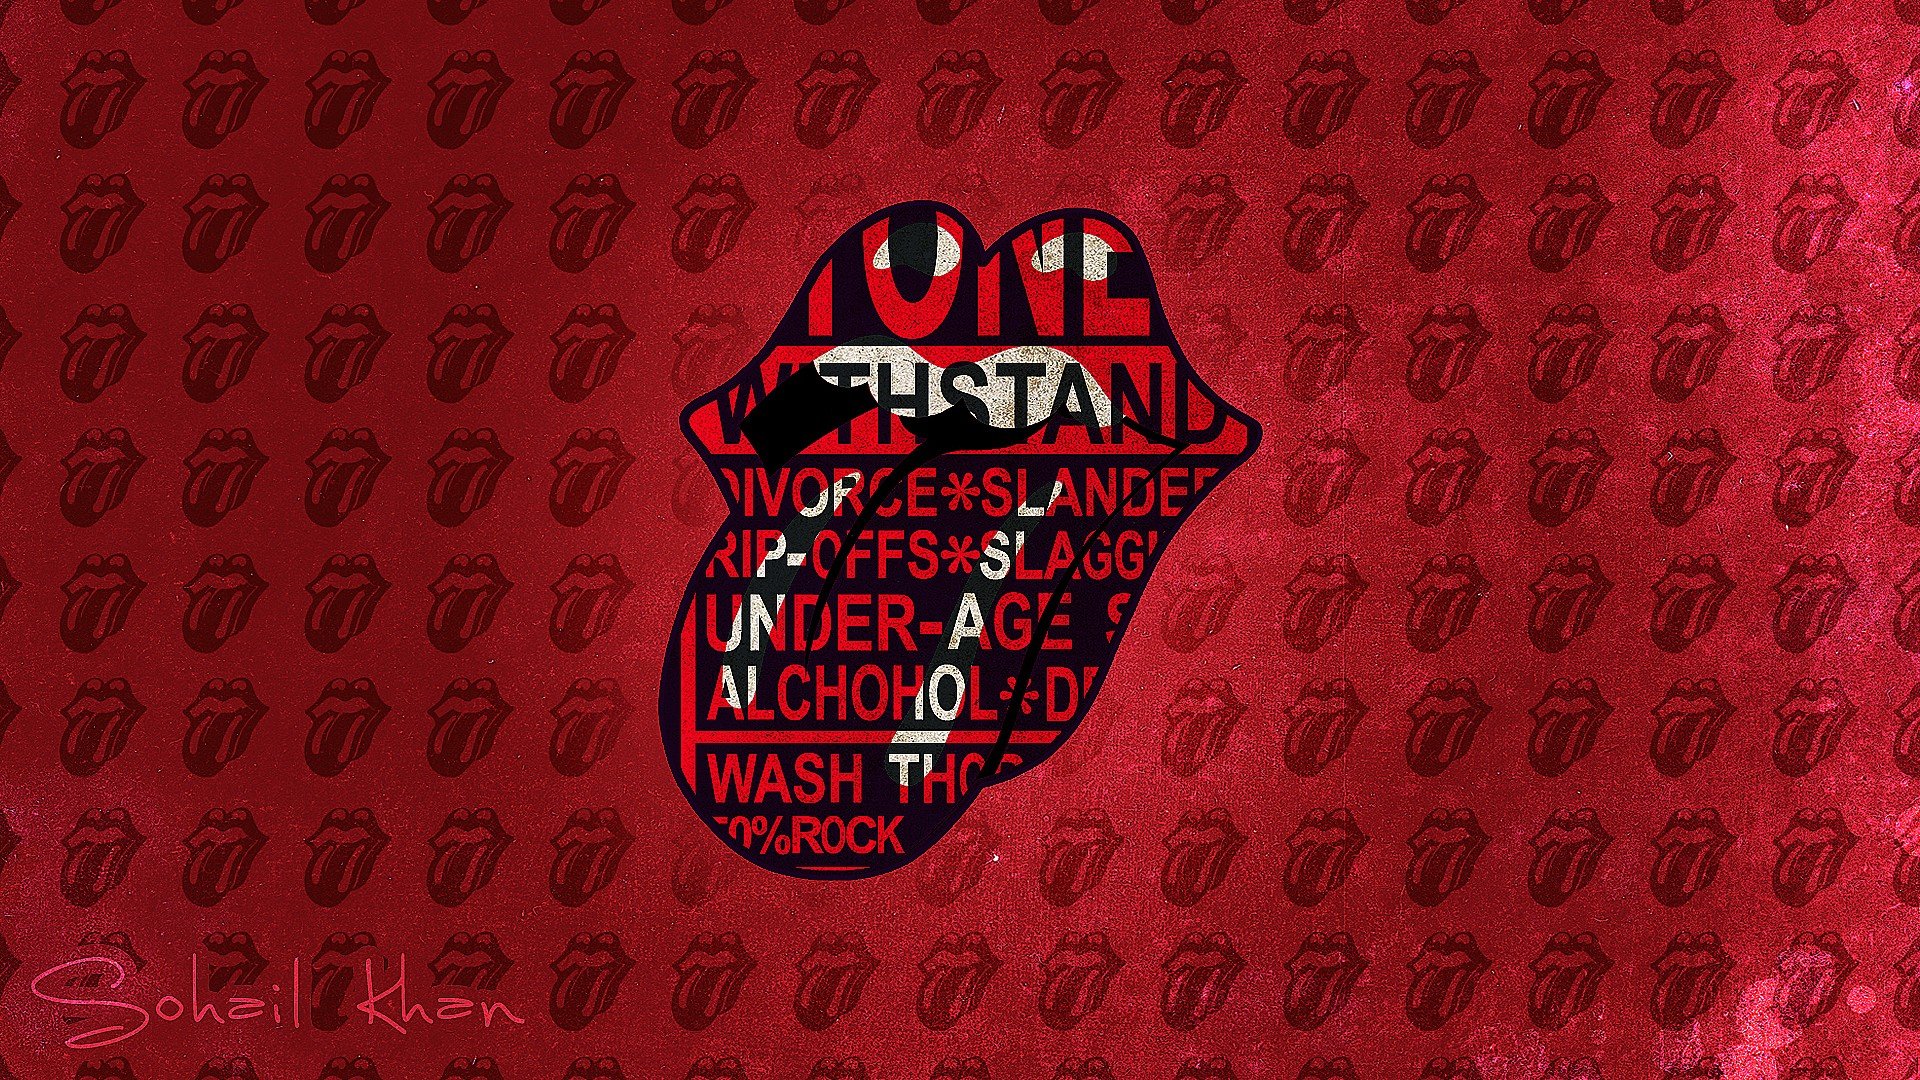 Download full hd The Rolling Stones PC background ID:402444 for free